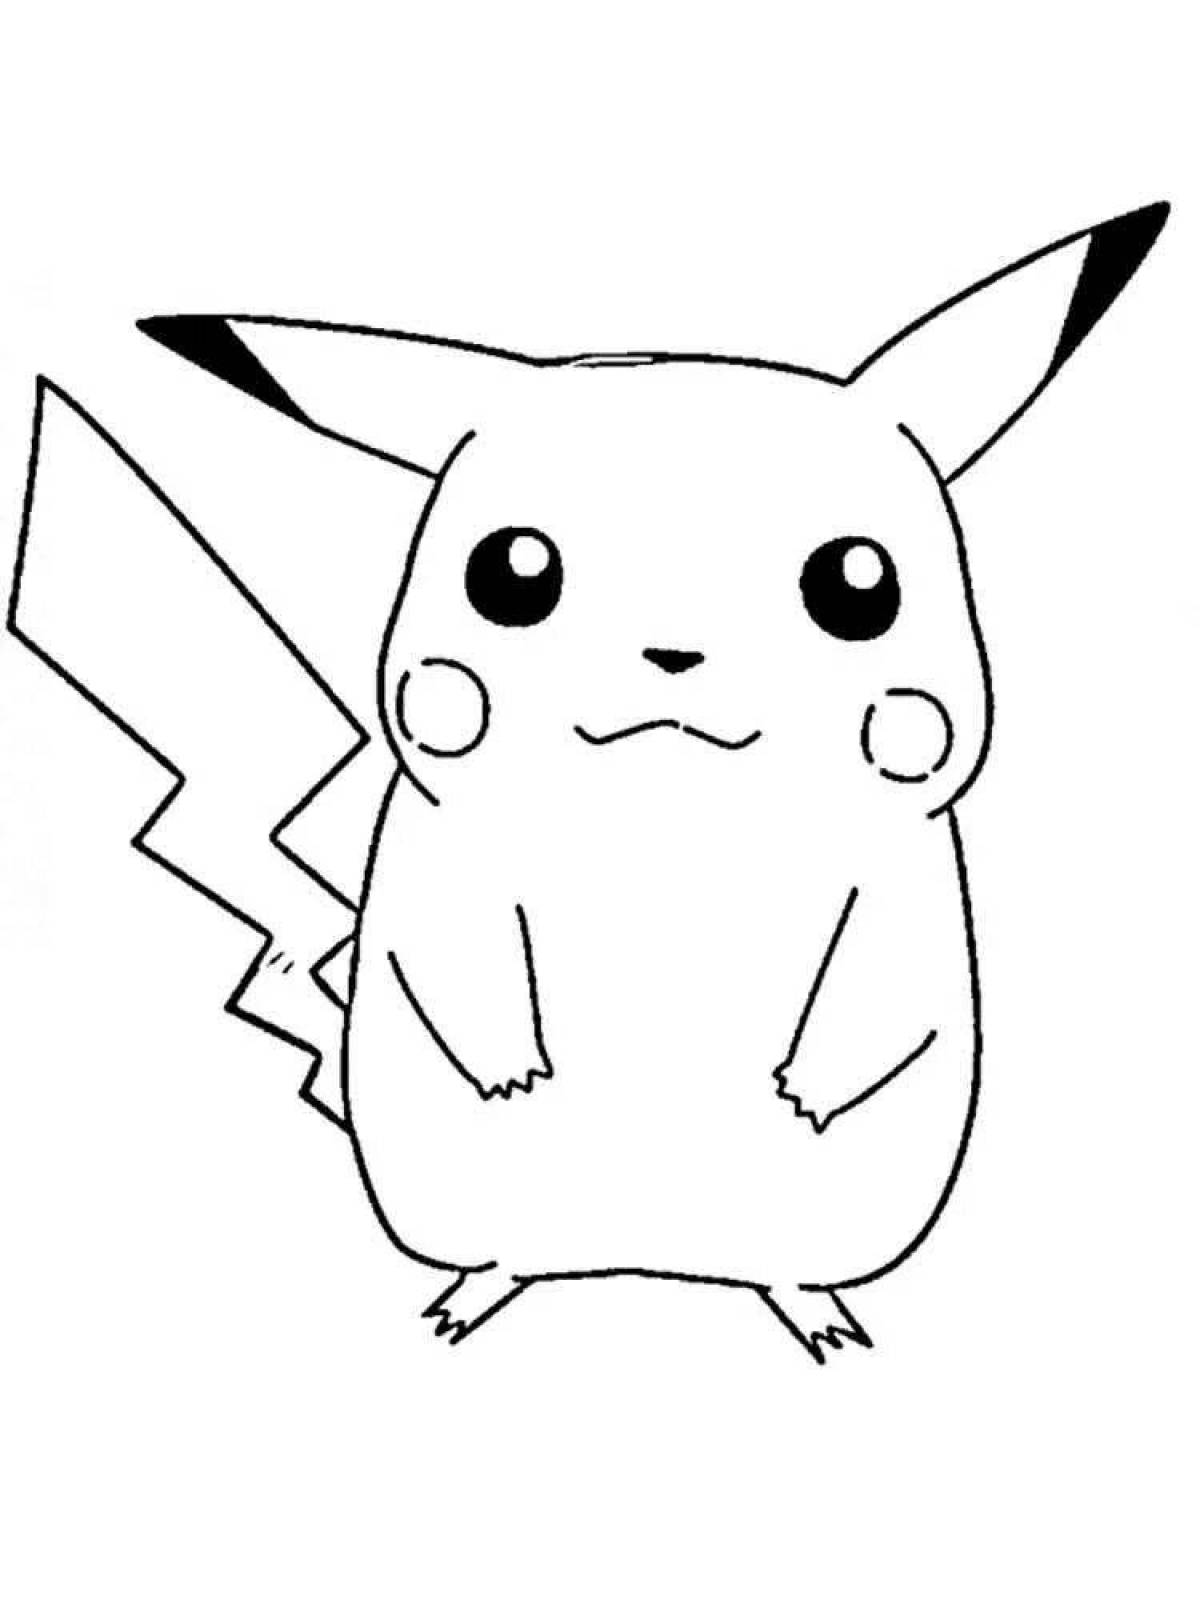 Adorable pikachu figurine coloring page